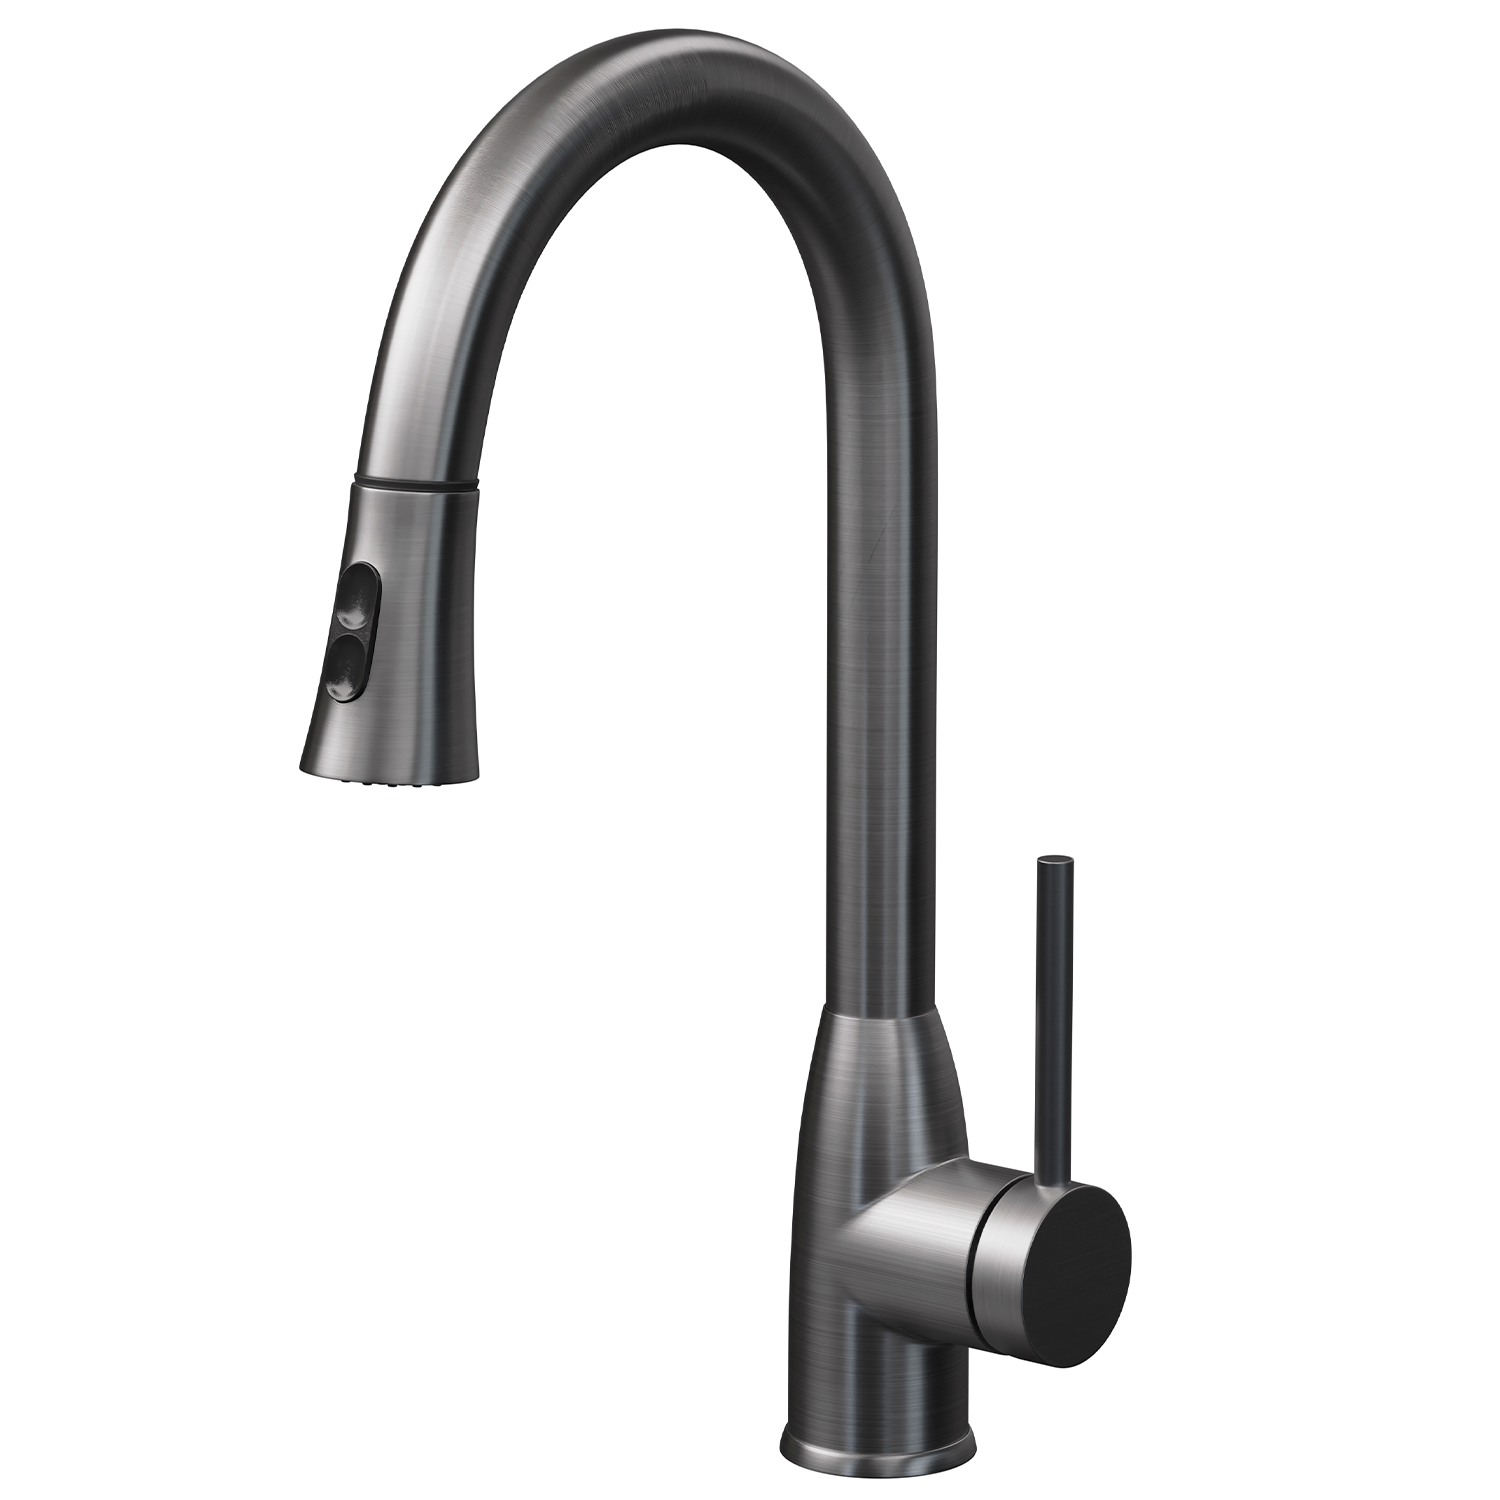 DAX Single Handle Pull Down Kitchen Faucet with Dual Sprayer, Brass Body, Brushed Nickel Finish, Size 11-7/16 x 17-1/2 Inches (DAX-8887)